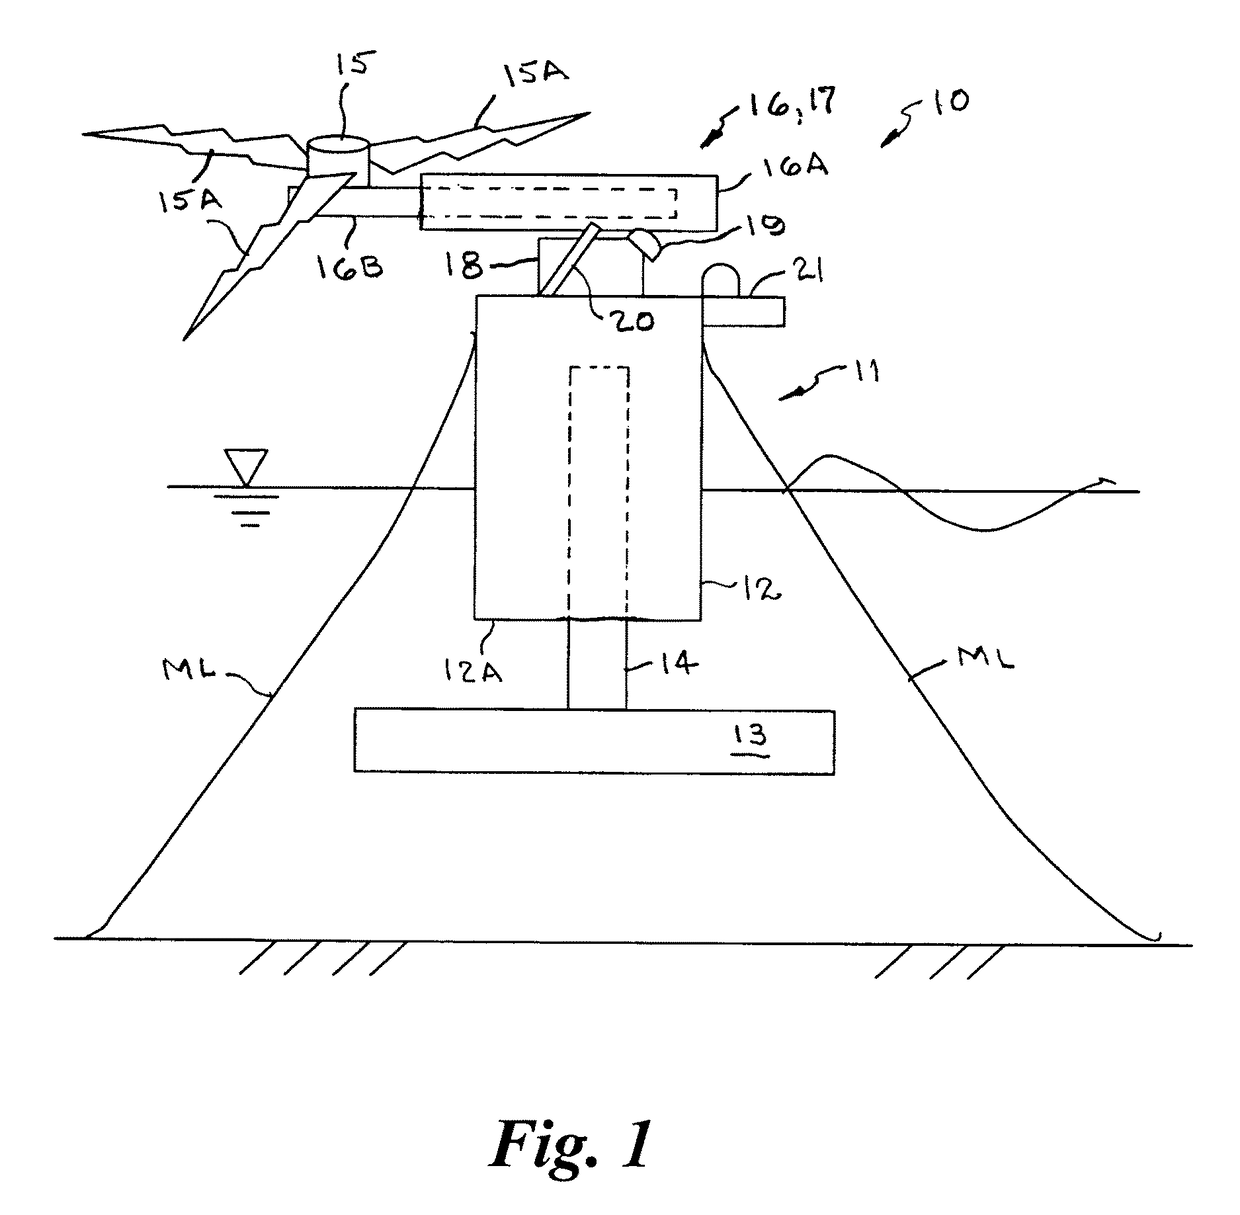 Self-installing column stabilized offshore wind turbine system and method of installation